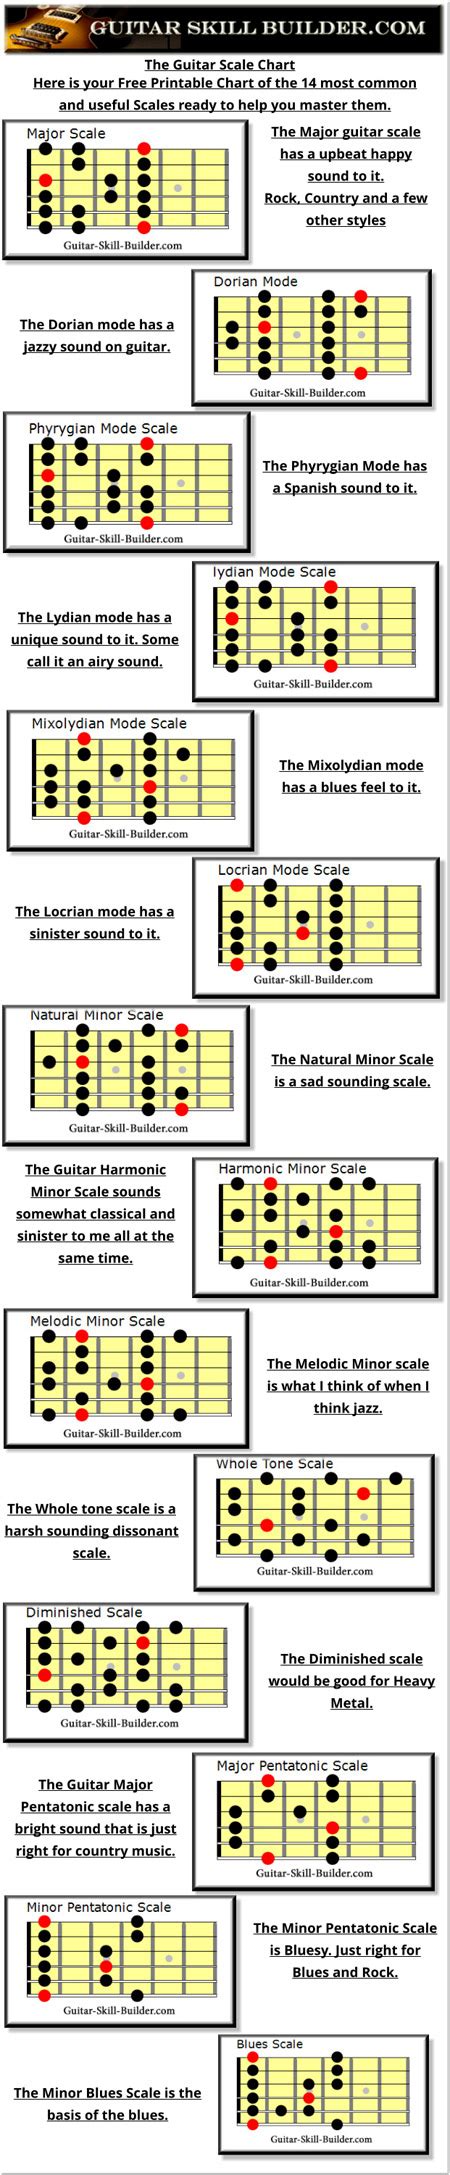 Free Printable Guitar Scales 14 Most Commonly Used Scales